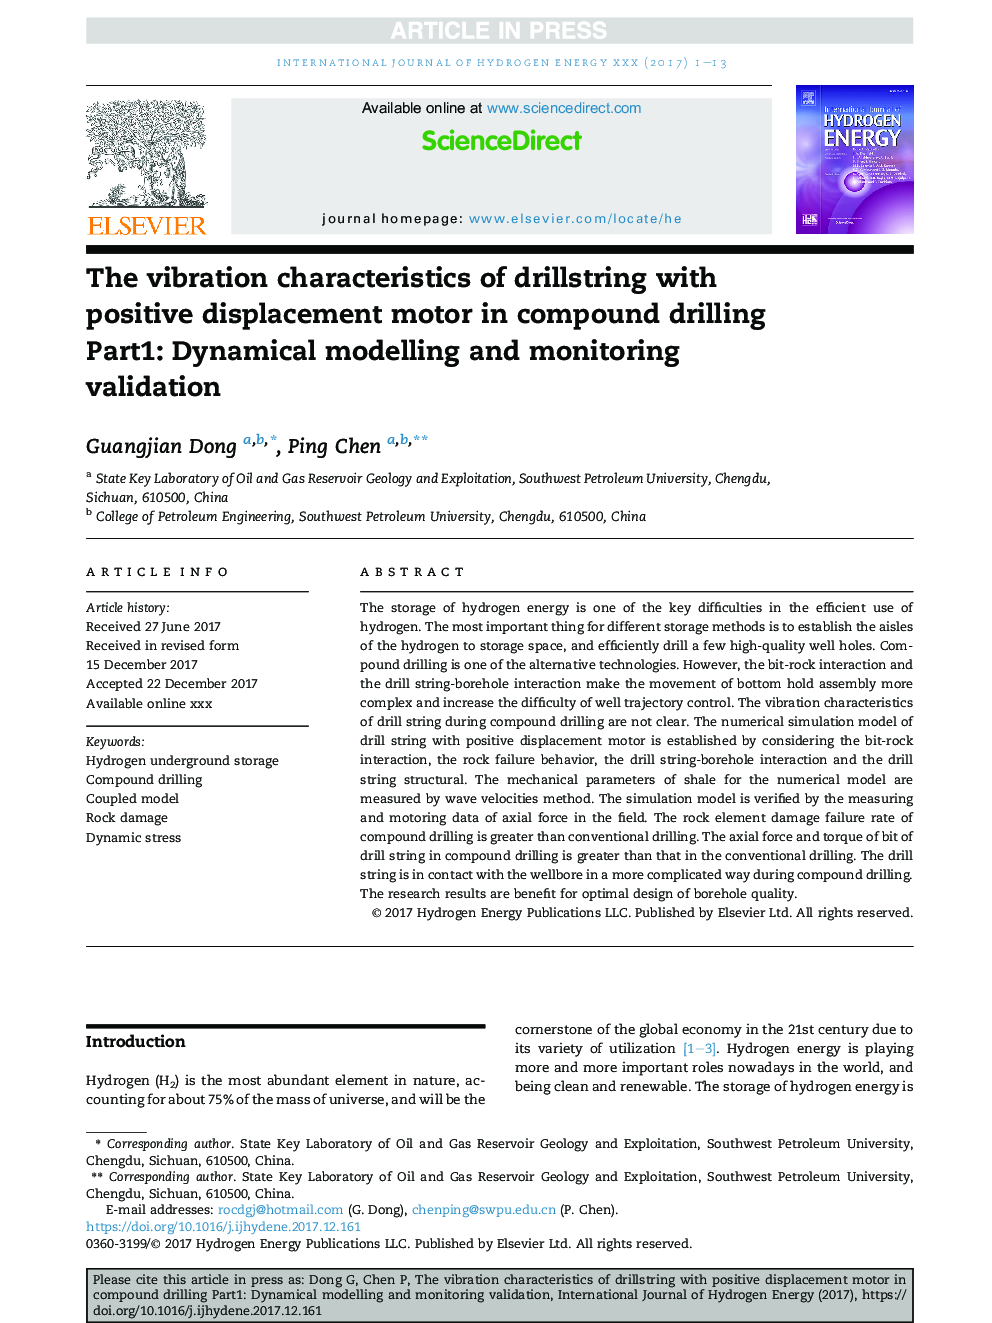 The vibration characteristics of drillstring with positive displacement motor in compound drilling Part1: Dynamical modelling and monitoring validation